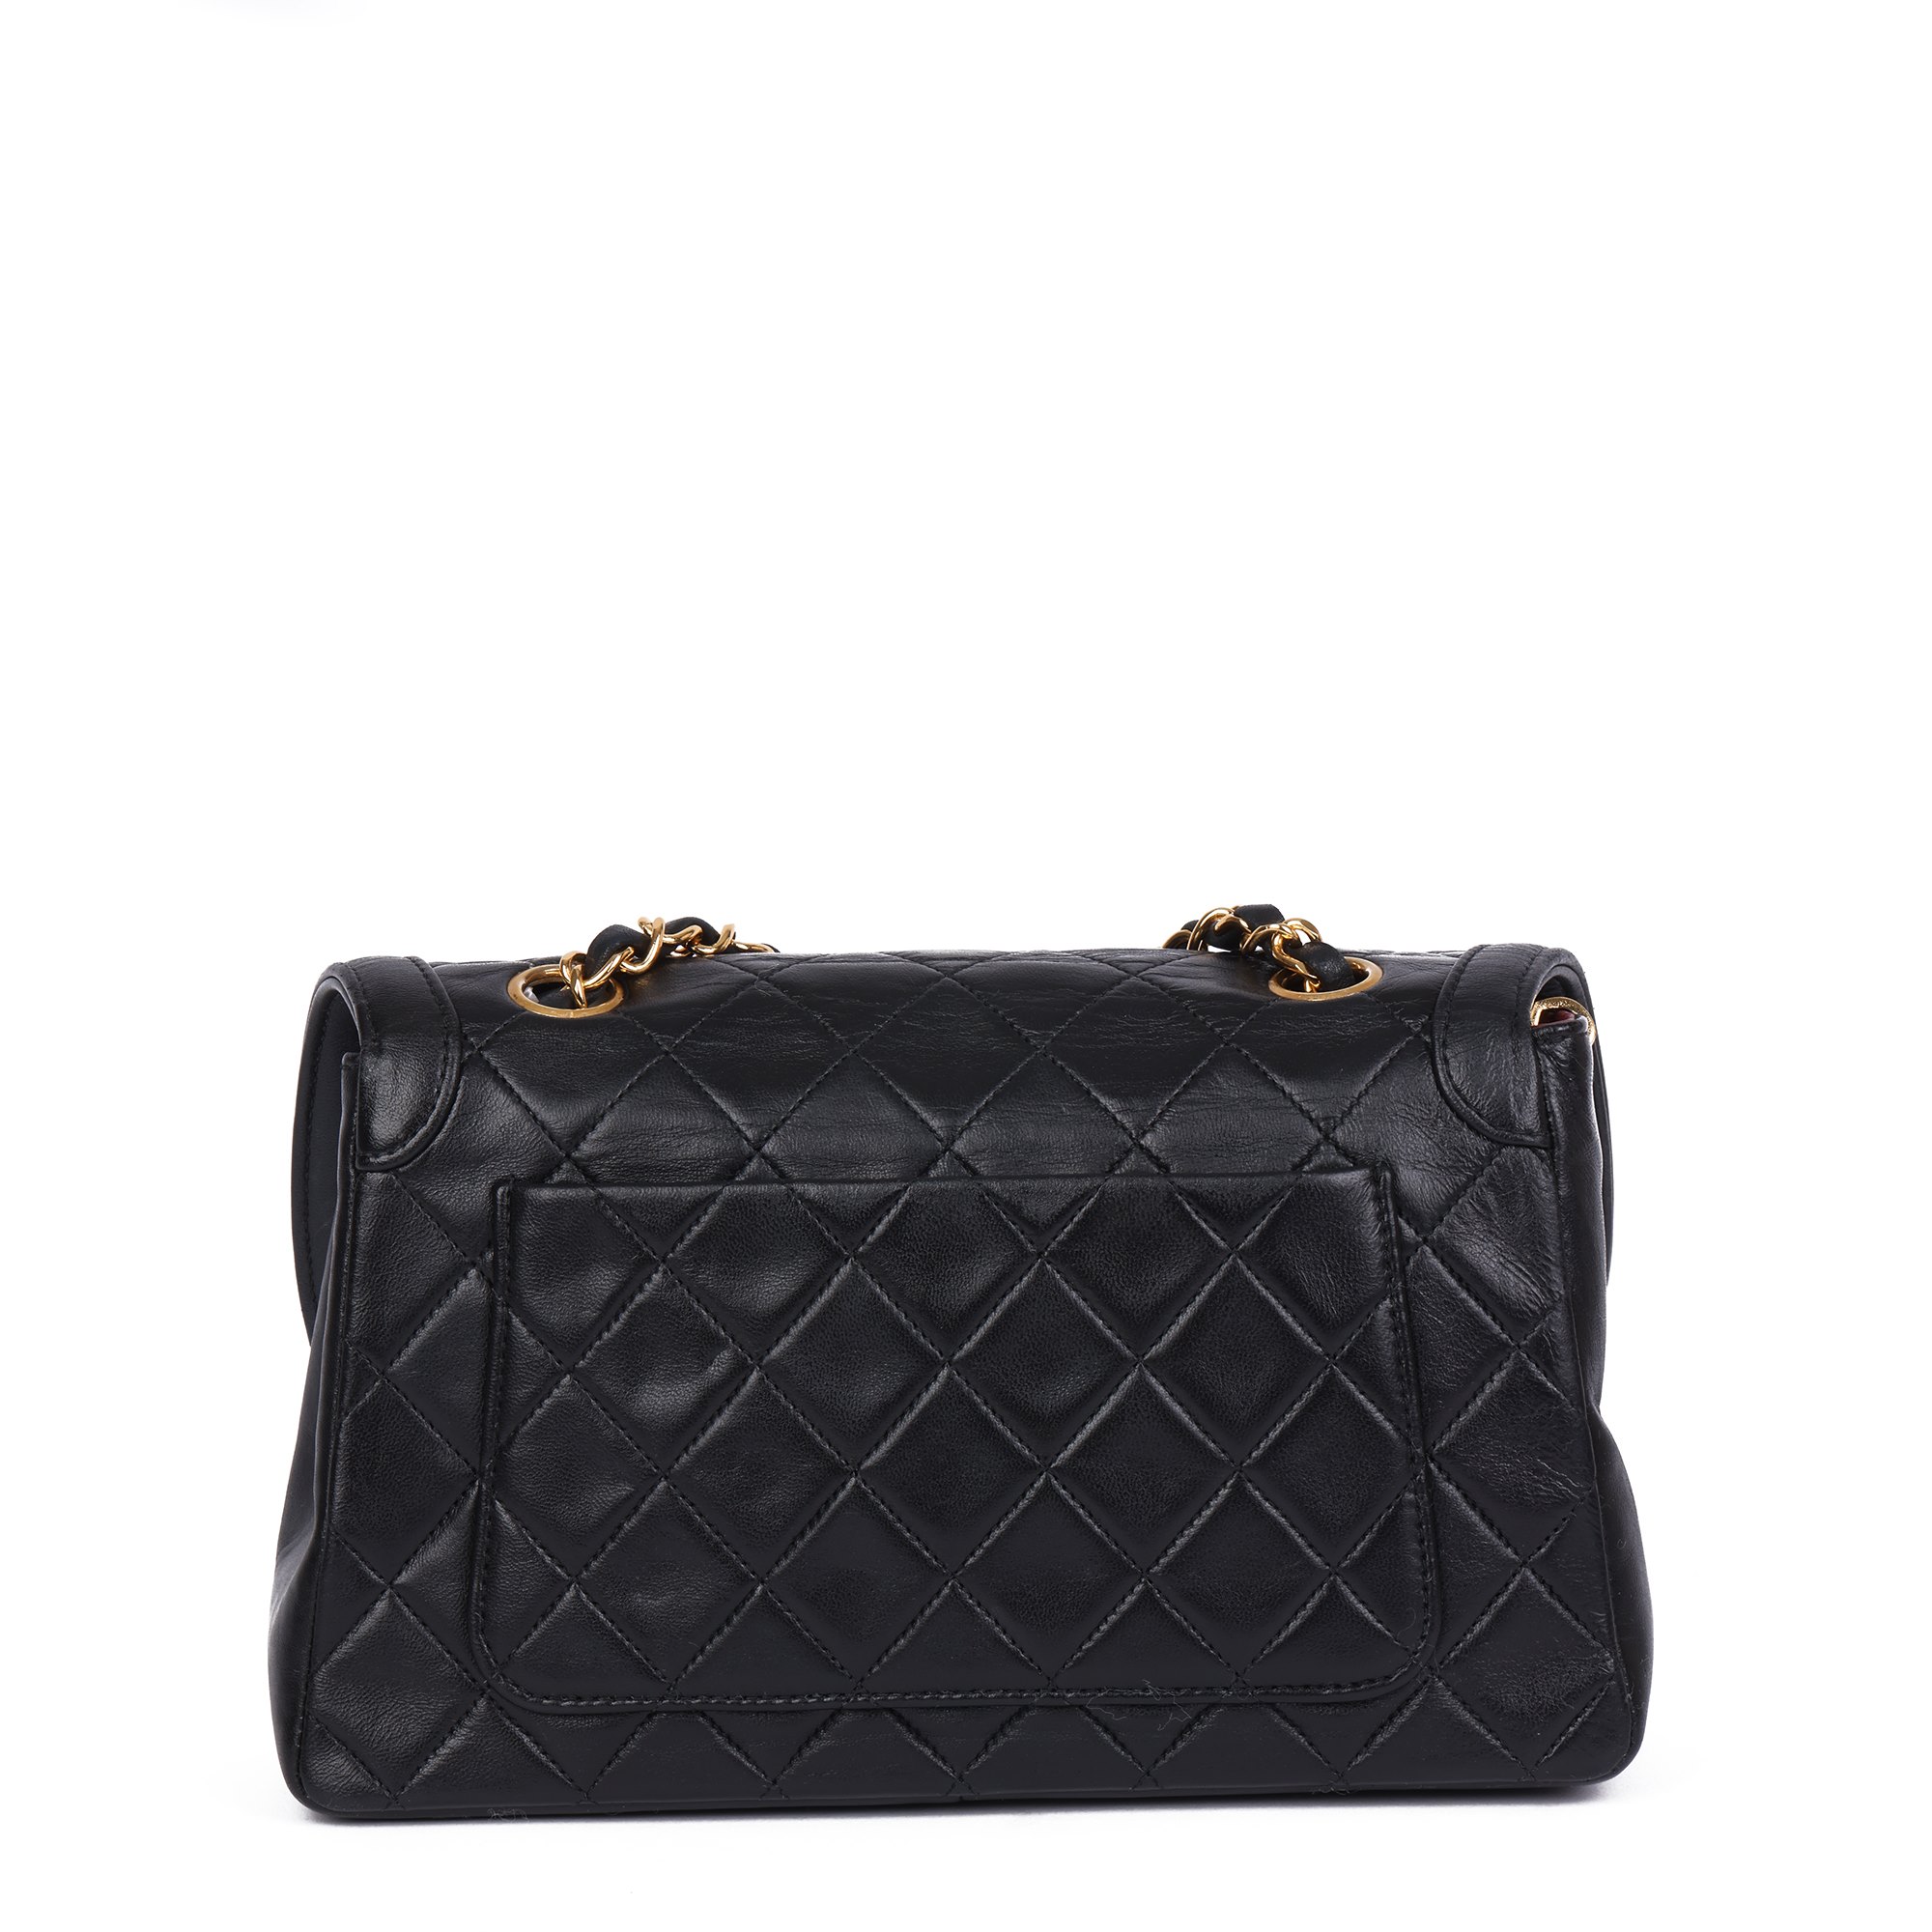 Chanel Black Quilted Lambskin Vintage Small Classic Single Flap Bag with Pouch